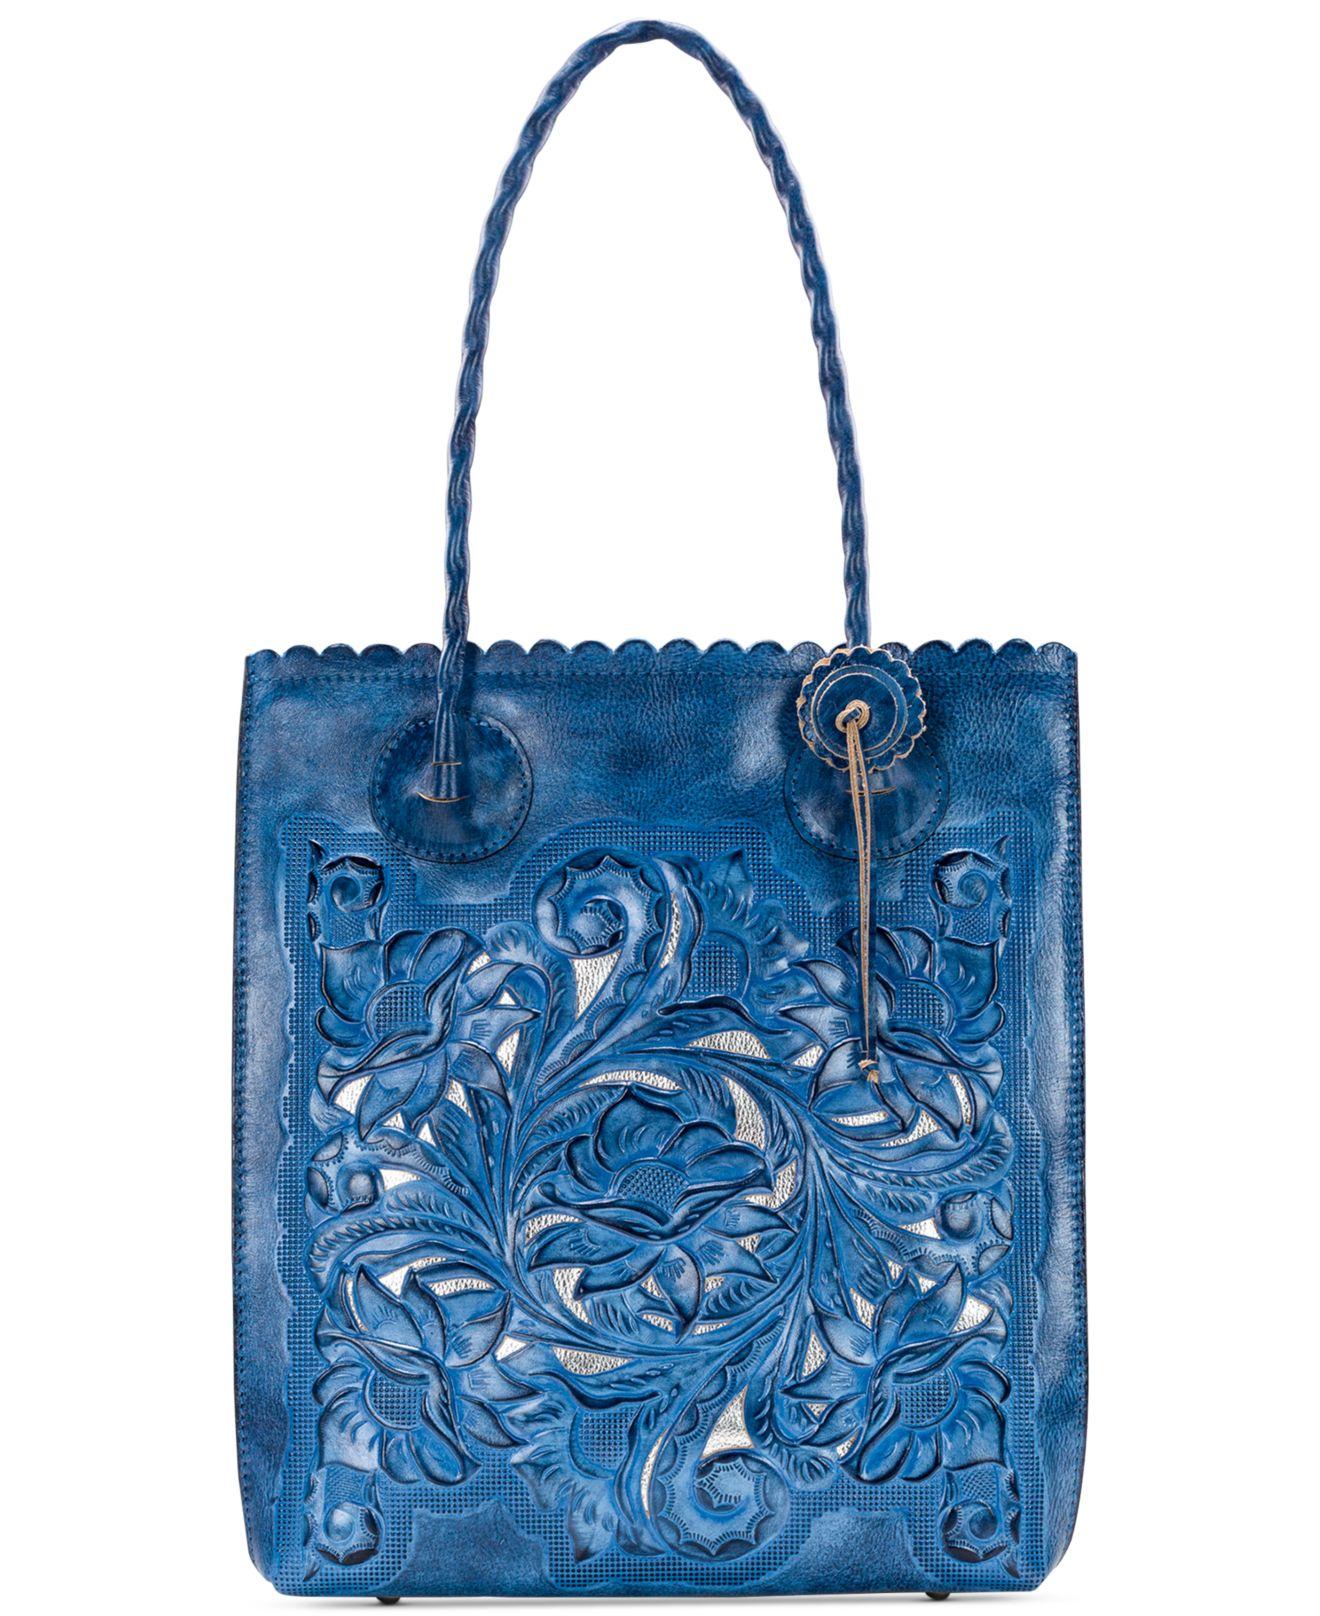 Patricia Nash Cavo Burnished Tooled Leather Tote in Blue - Lyst